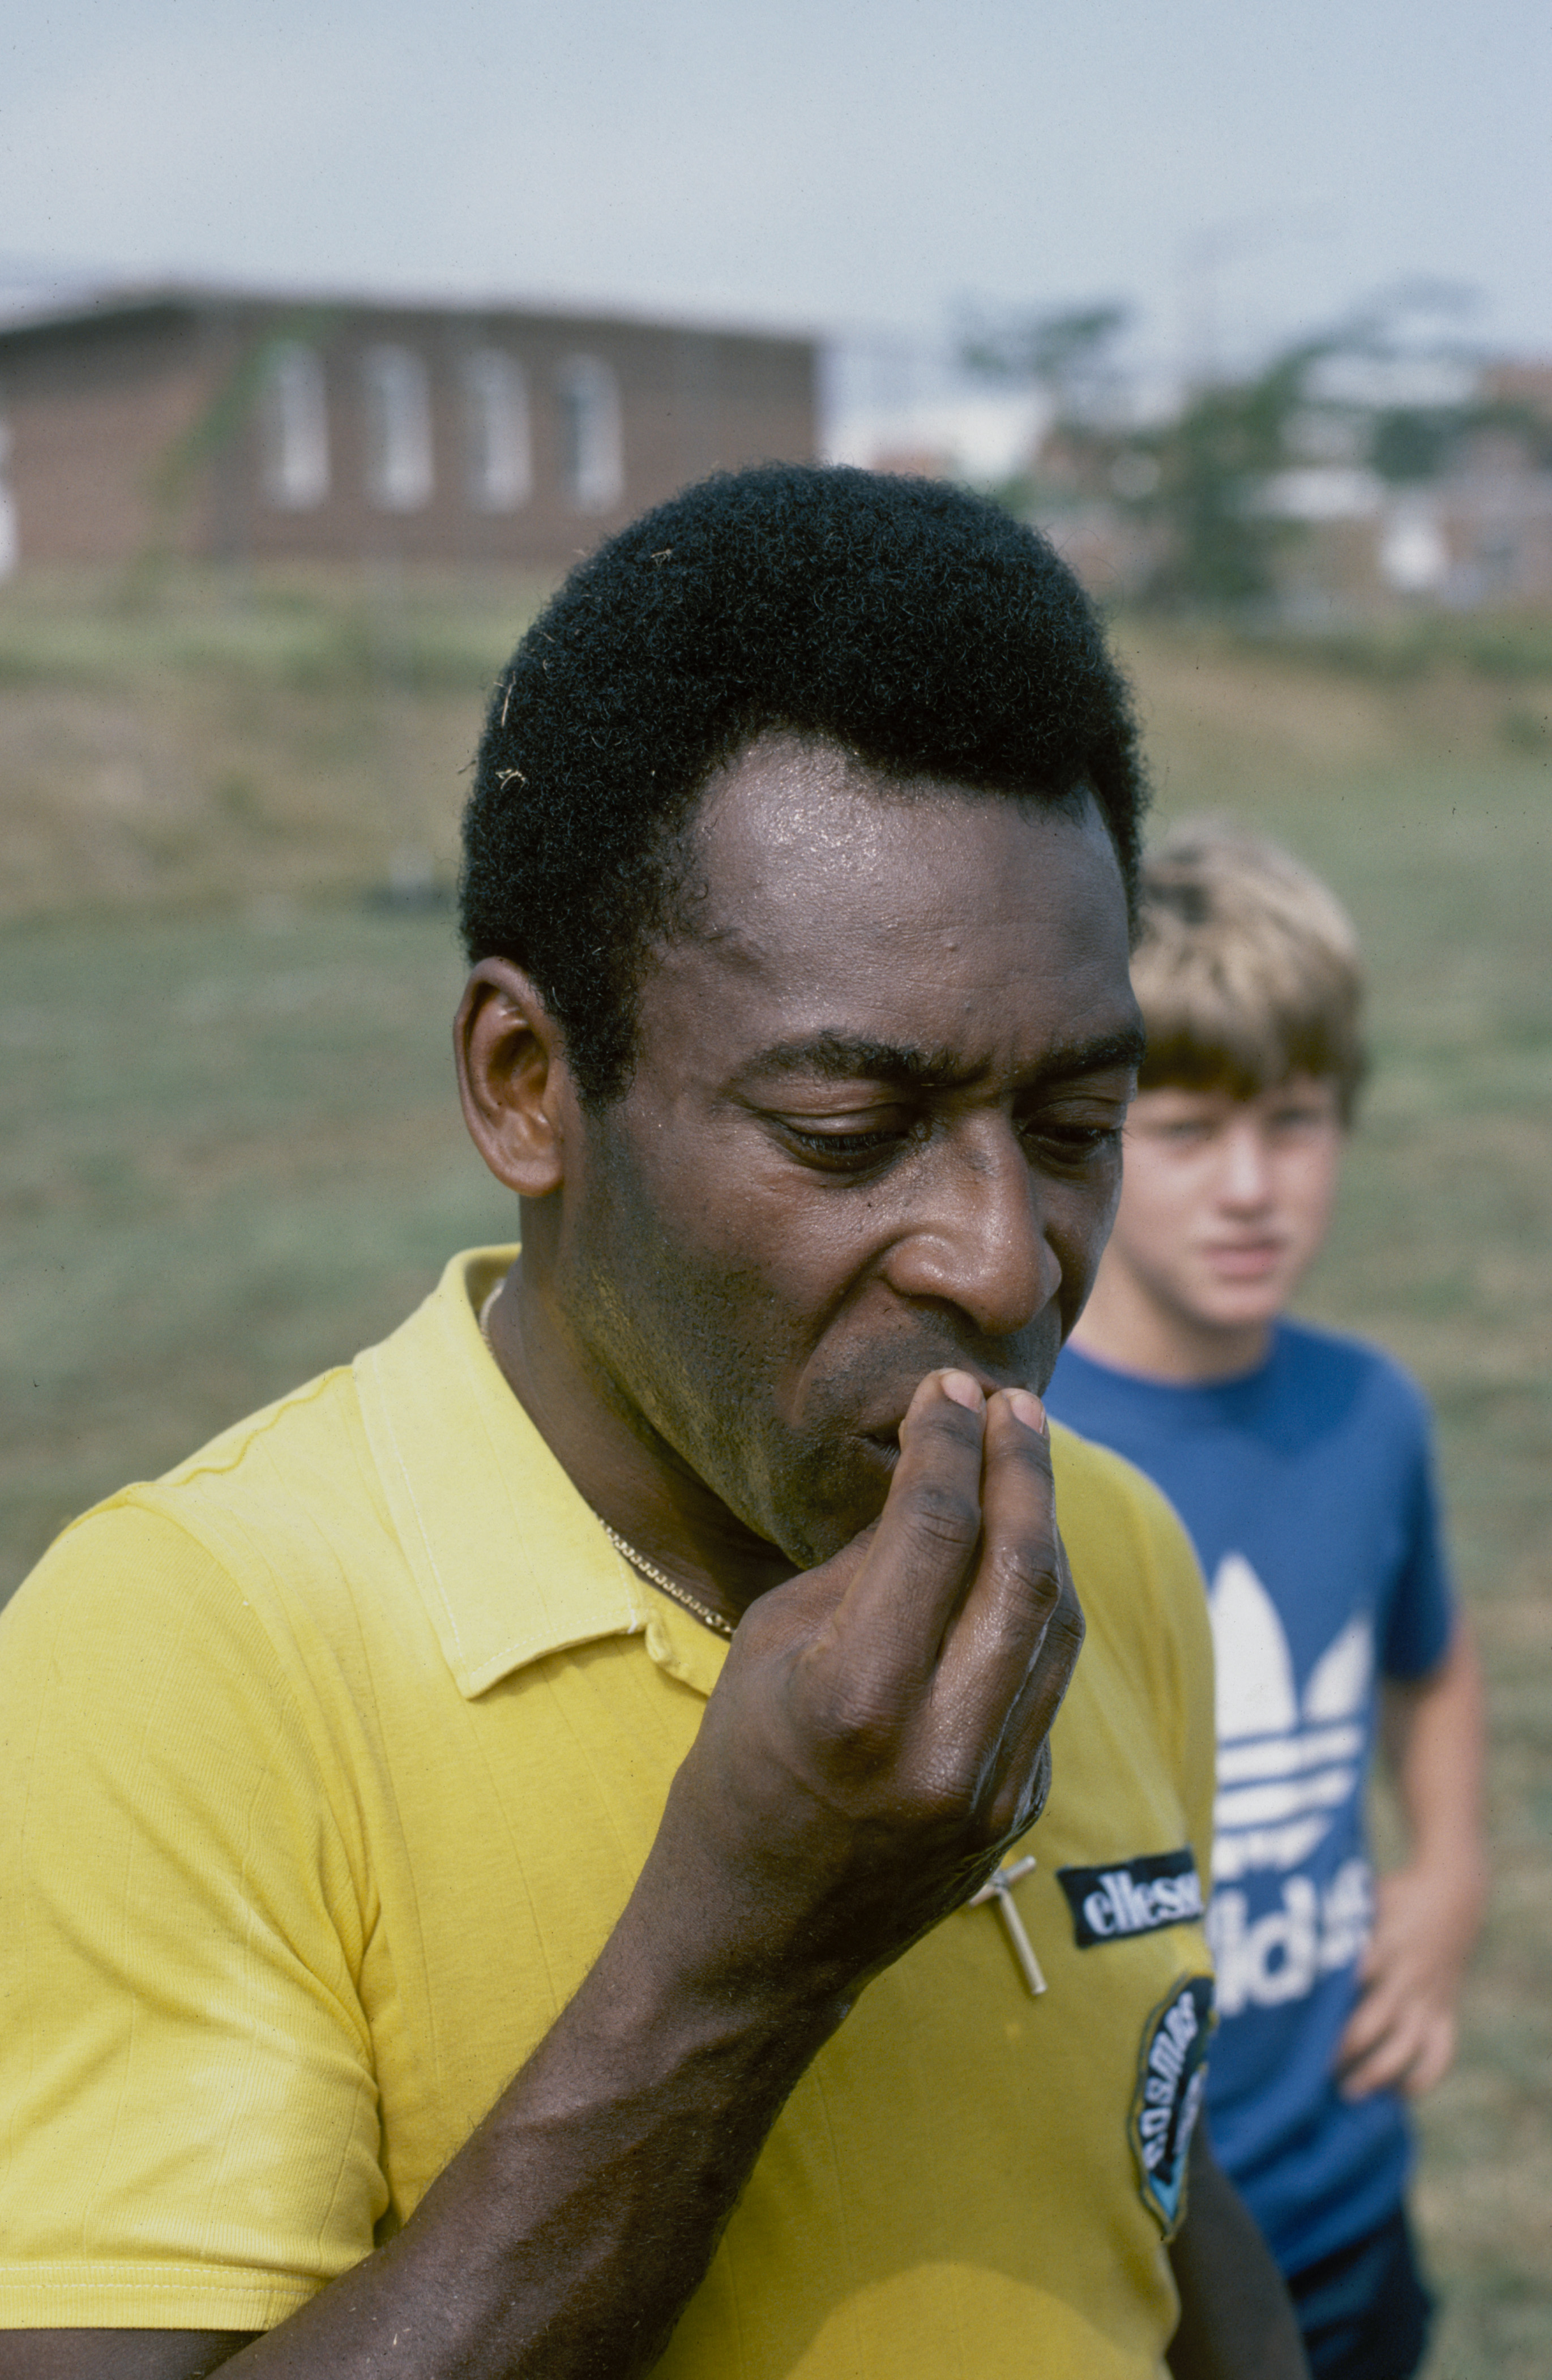 Brazilian footballer Pele kisses his hand during a training session, mid 1970s. (Photo by Duncan Raban/Getty Images)